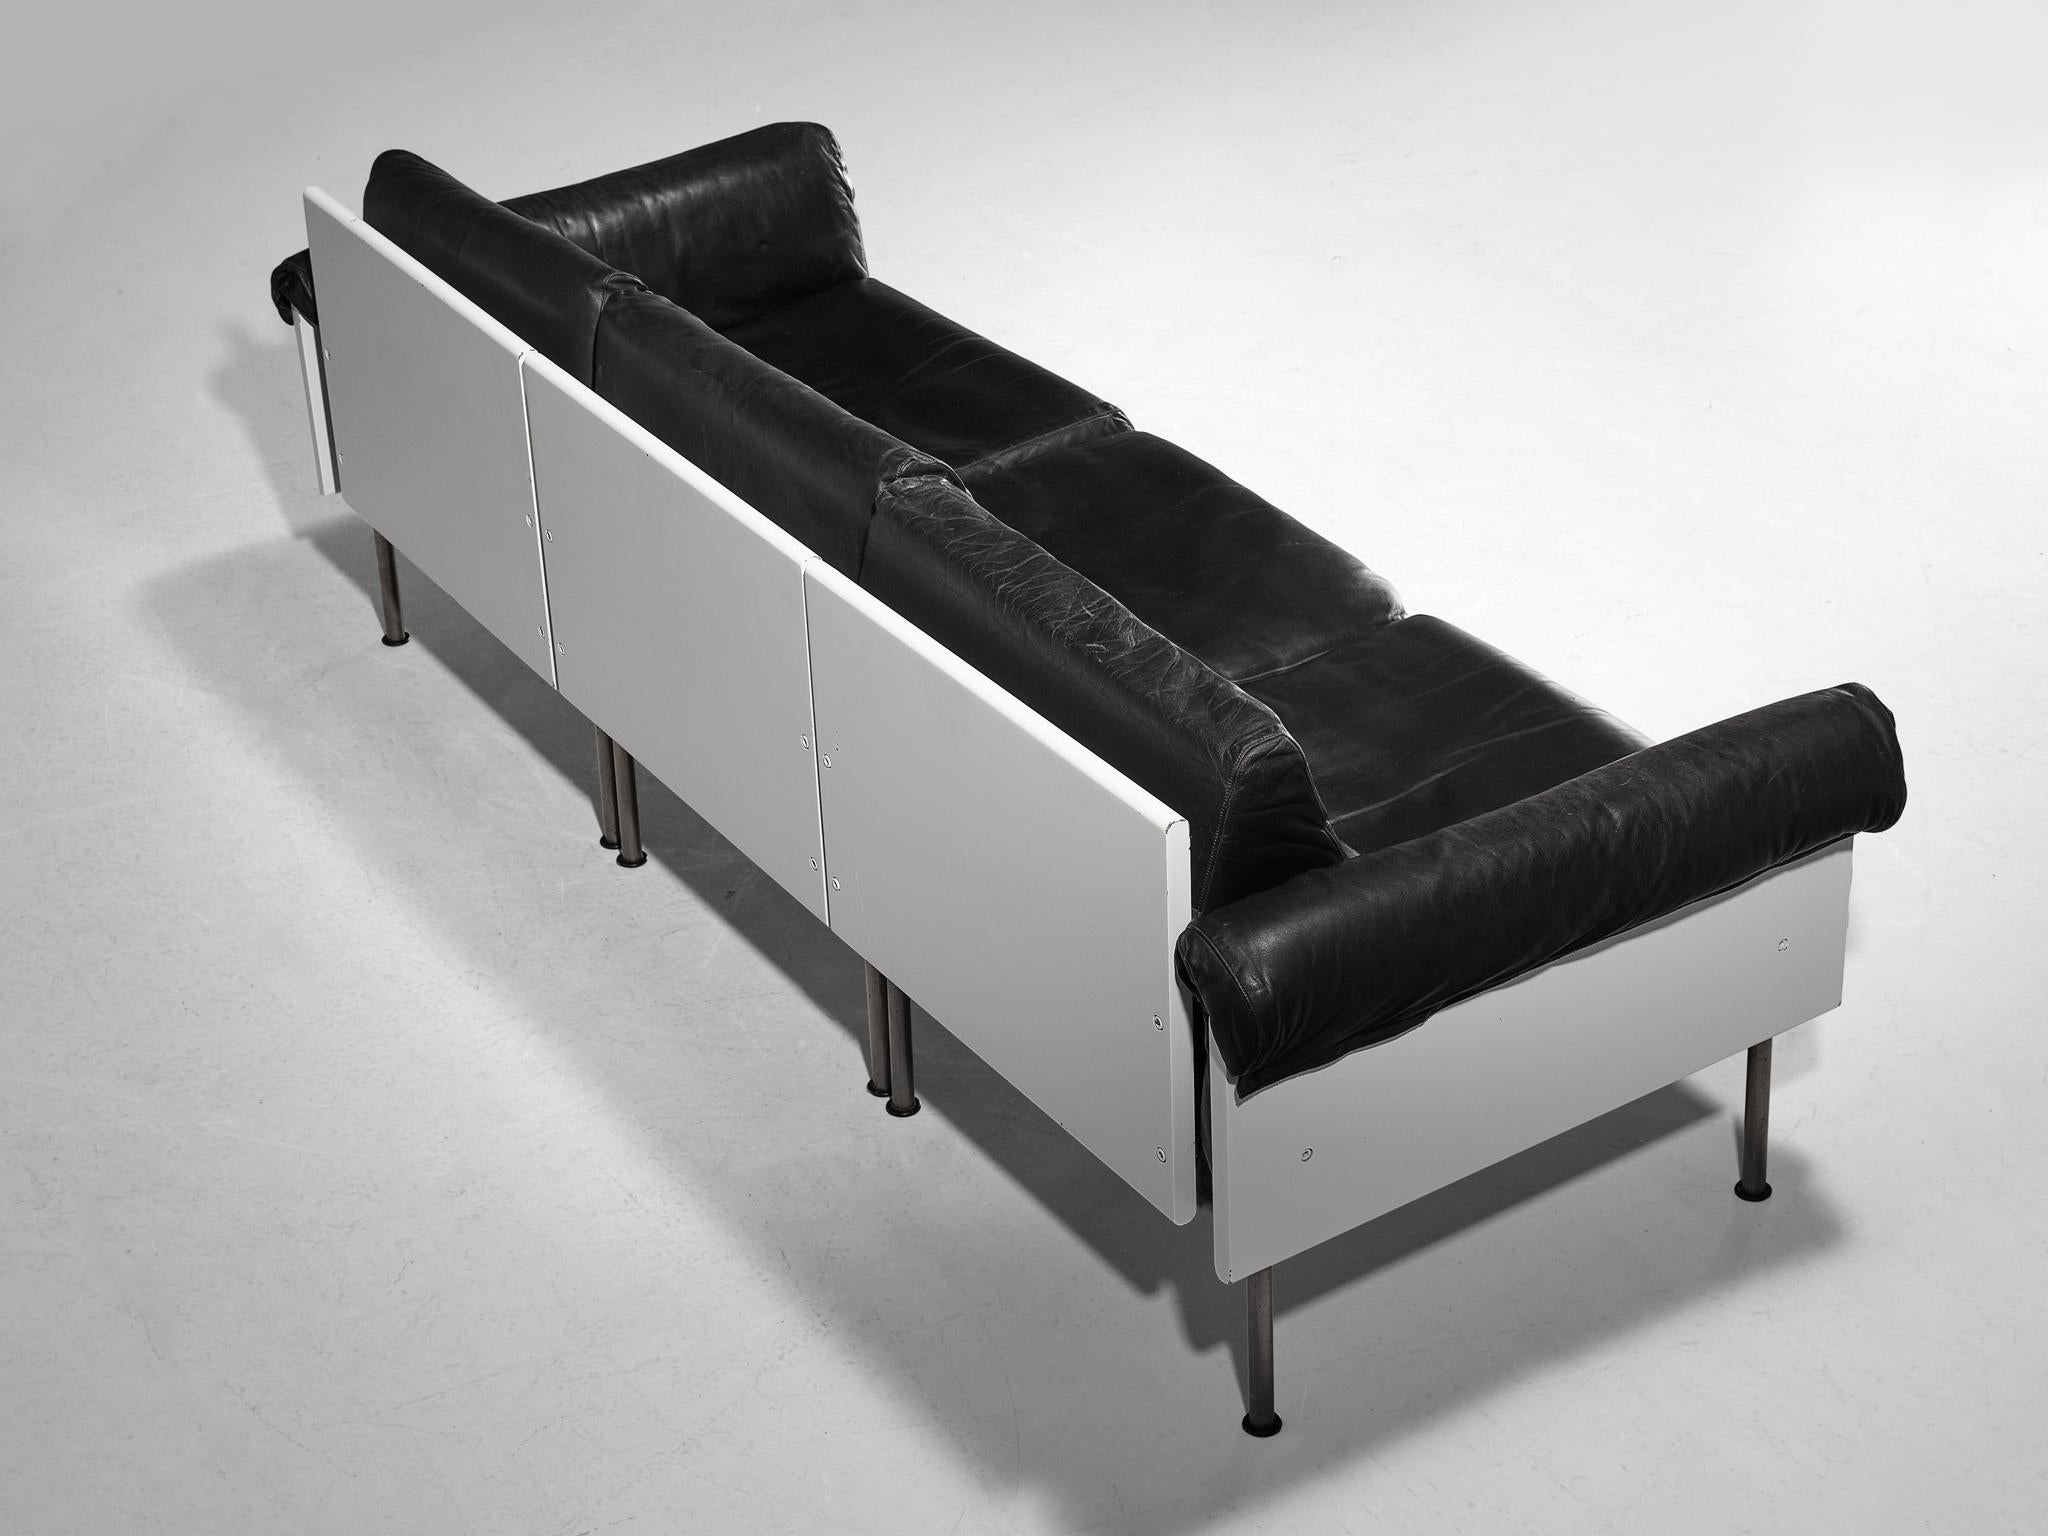 Yrjö Kukkapuro for Haimi Finland, modular sofa, leather, metal, wood, Finland, 1963

This streamlined sectional sofa is characterized by a simplistic, natural and modernist aesthetics. The design features a solid construction of clear lines and